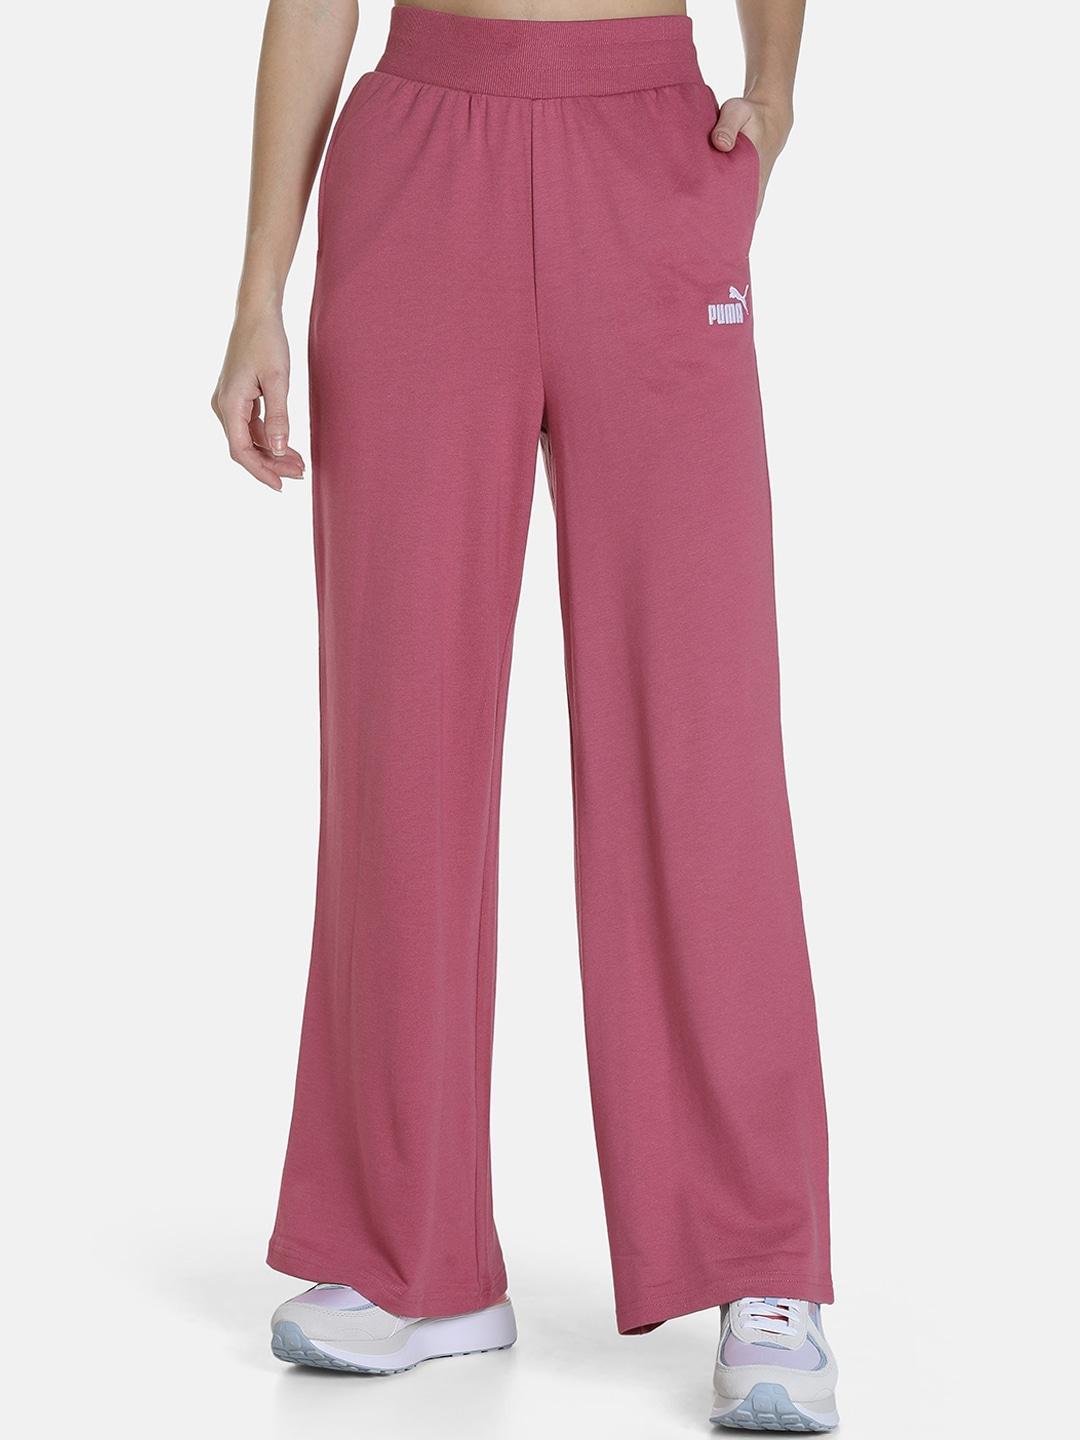 Puma Women Solid Relaxed Fit Pure Cotton Track Pants